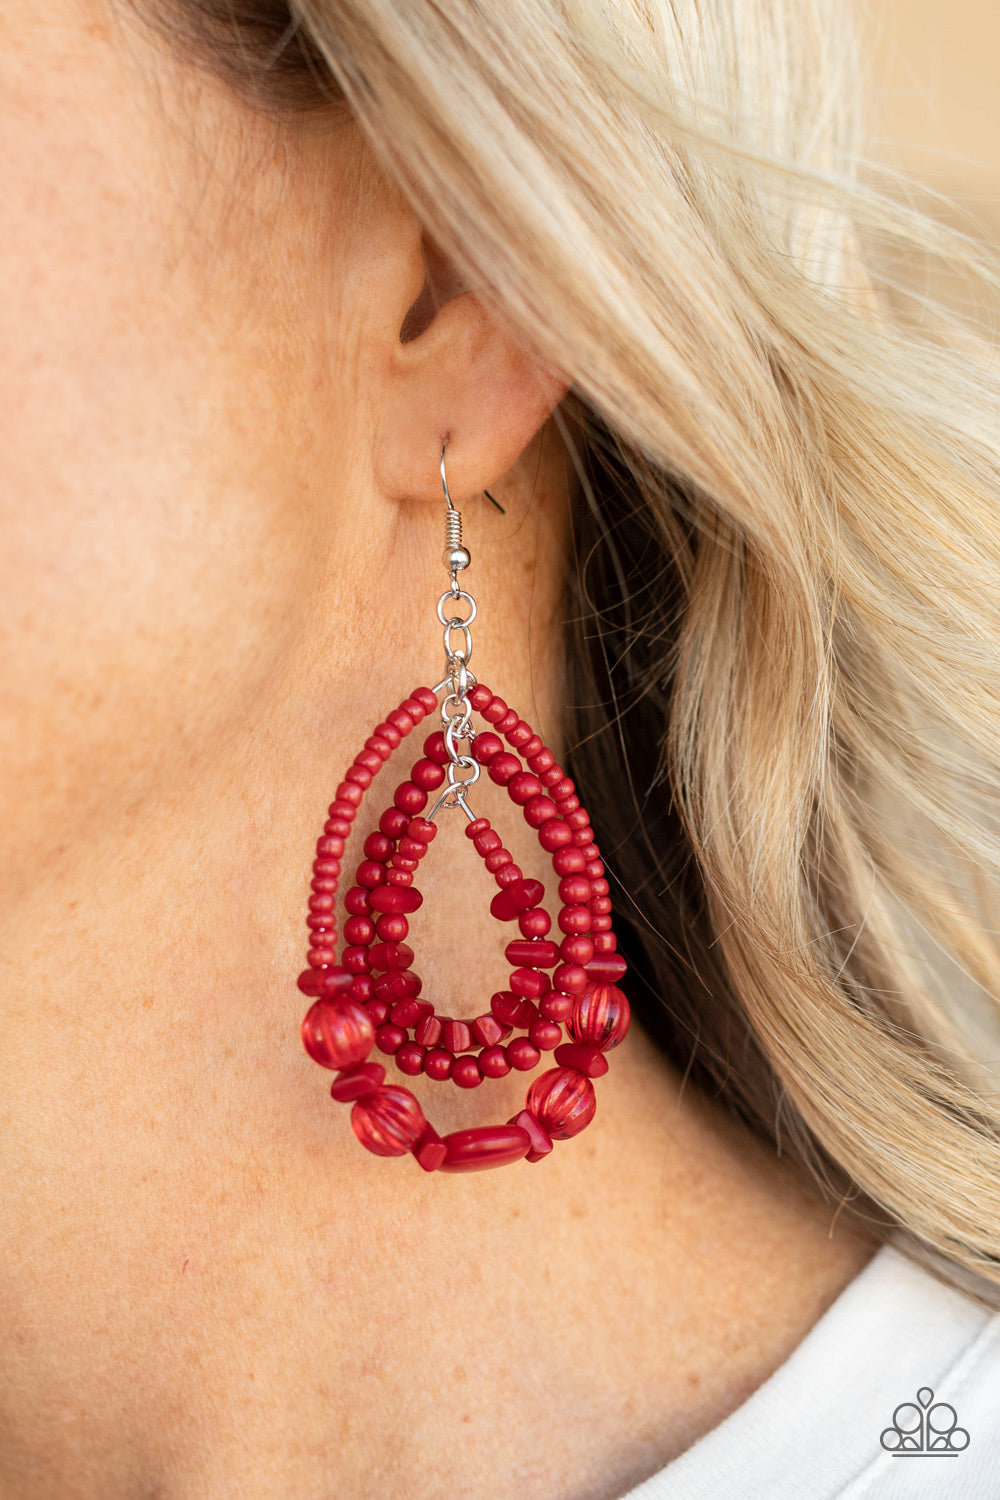 Paparazzi Accessories: Prana Party - Red Earrings